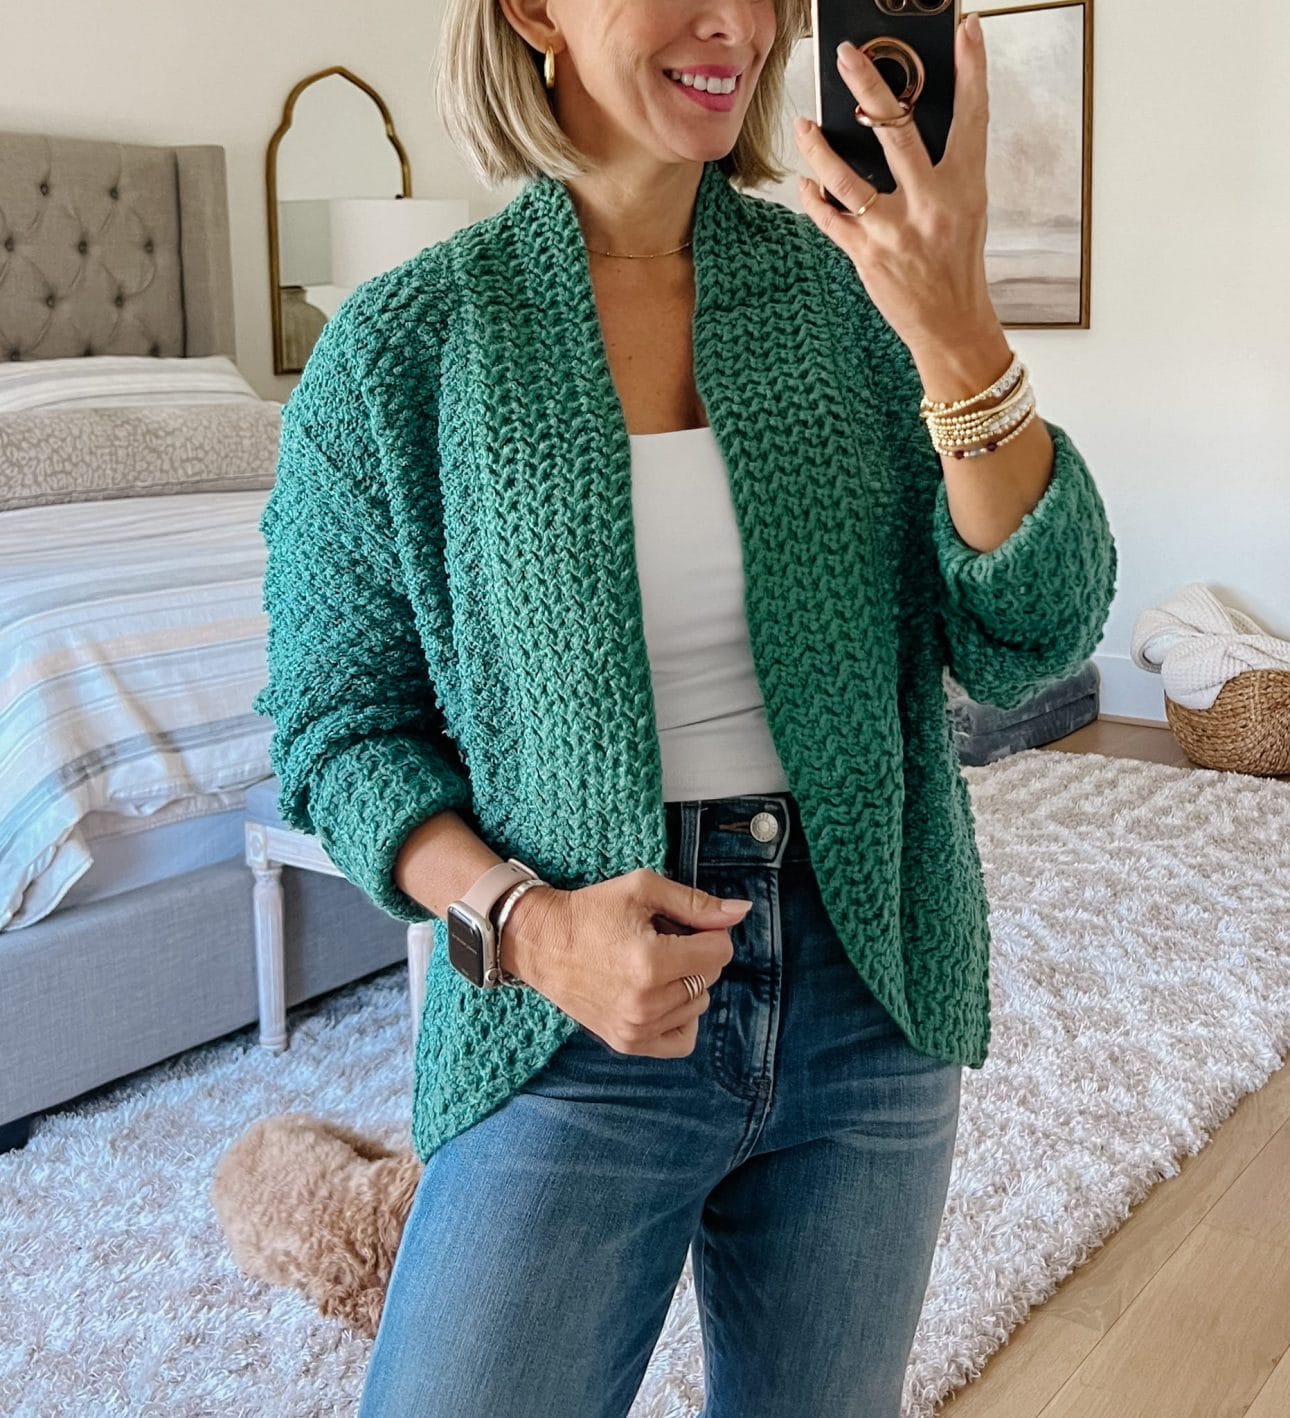 White Cami, Jeans, Green Cardigan